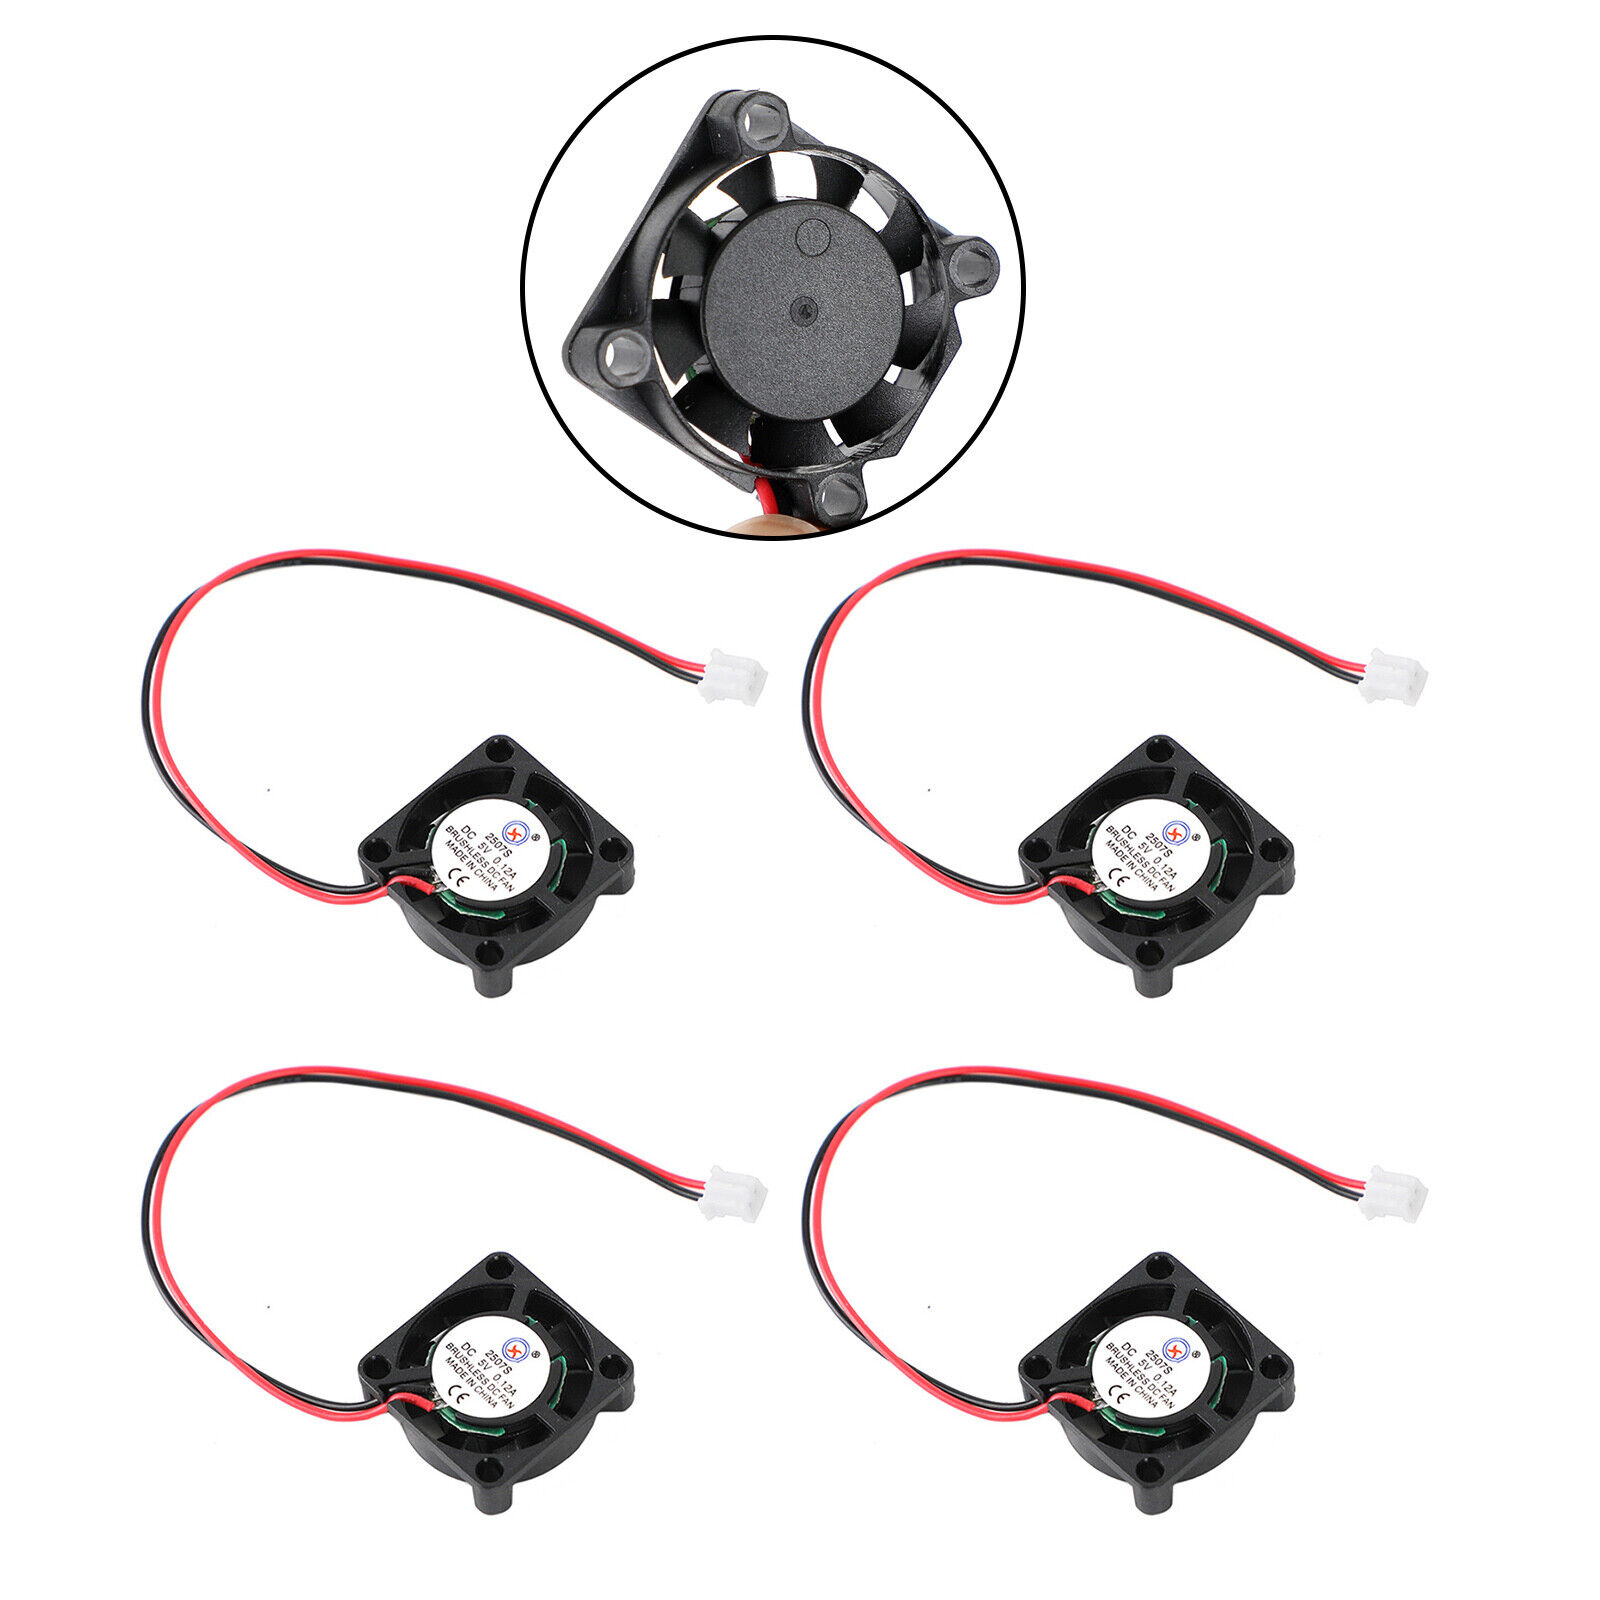 4x Brushless DC Cooling Blower Fan 5V 0.12A 2507S 25x25x7mm Sleeve 2 Pin Wire